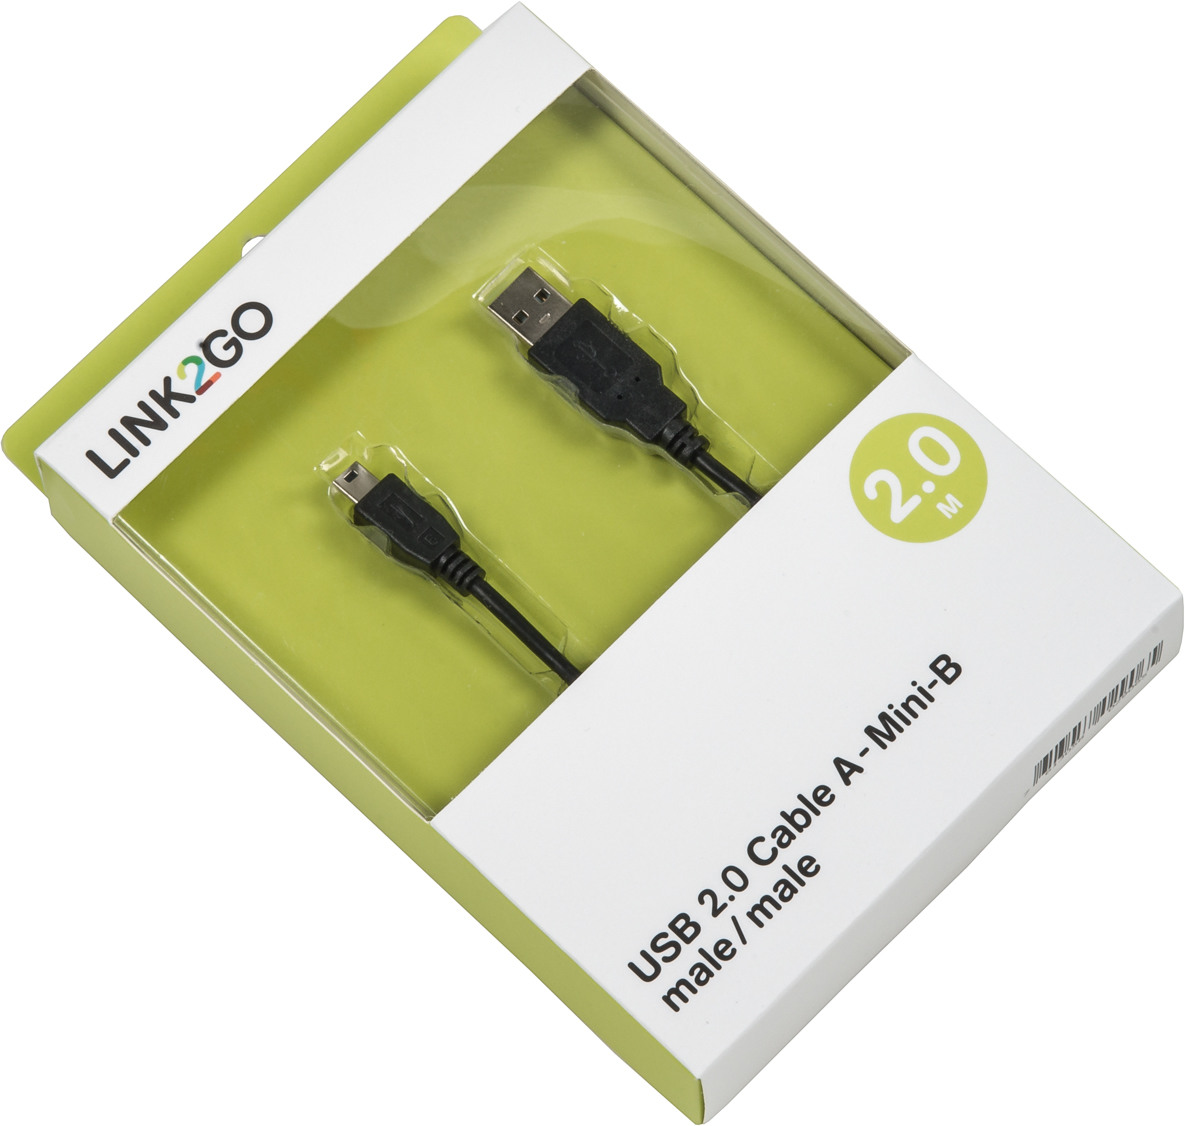 LINK2GO USB 2.0 Cable, A - Micro-B US2313KBB male/male, 2.0m male/male, 2.0m